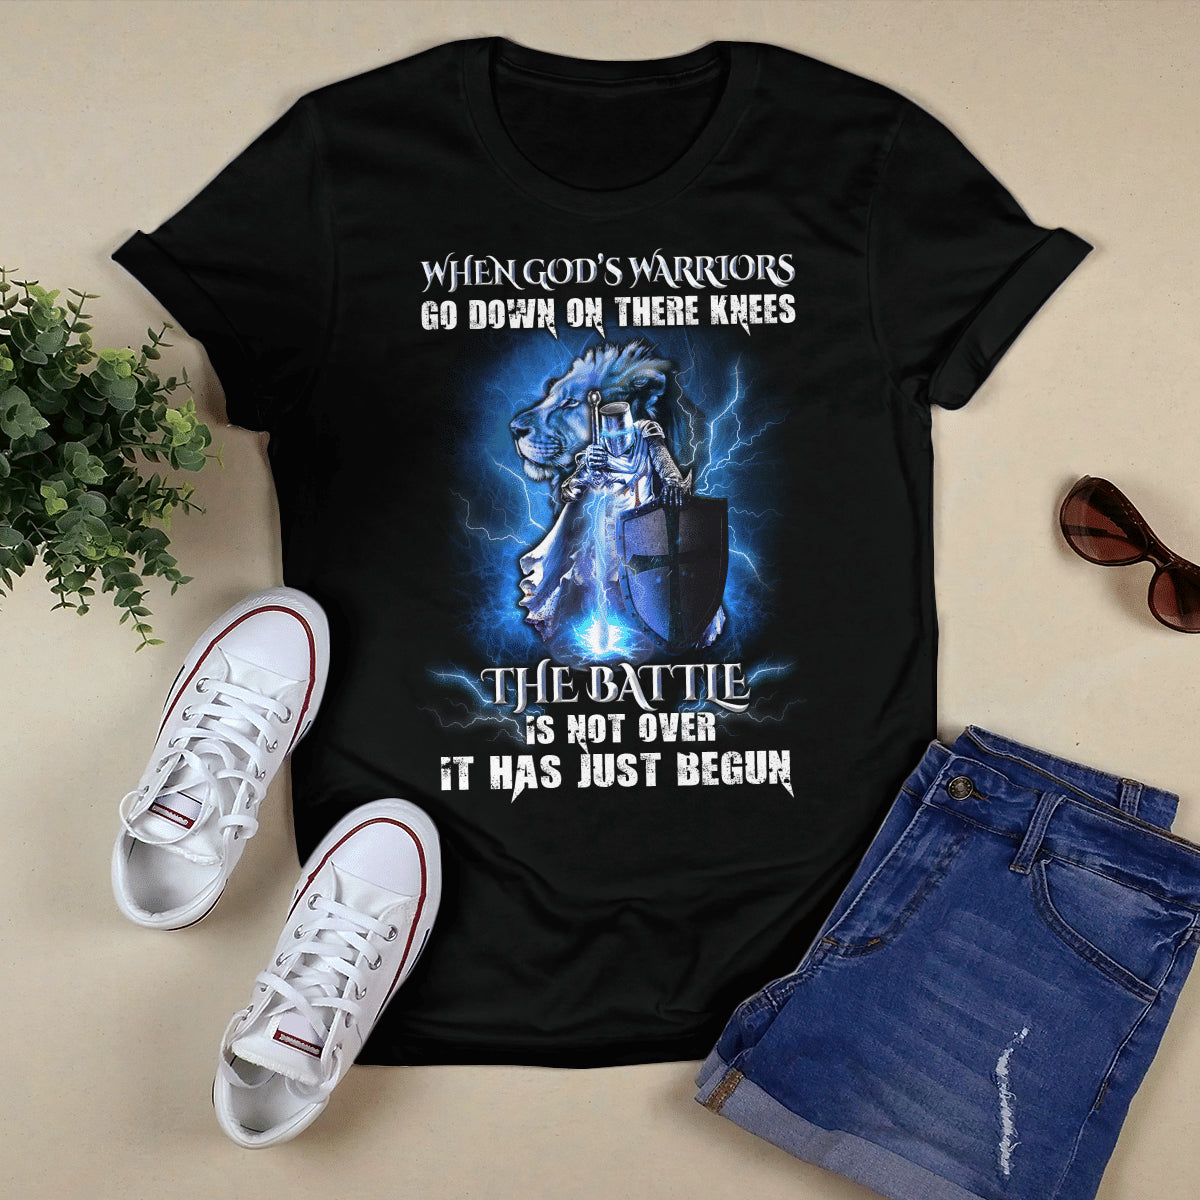 When God's Warriors Go Down On There Knees The Battle Is Not Over It Has Just Begun - Jesus T-Shirt - Christian Shirts For Men & Women - Ciaocustom